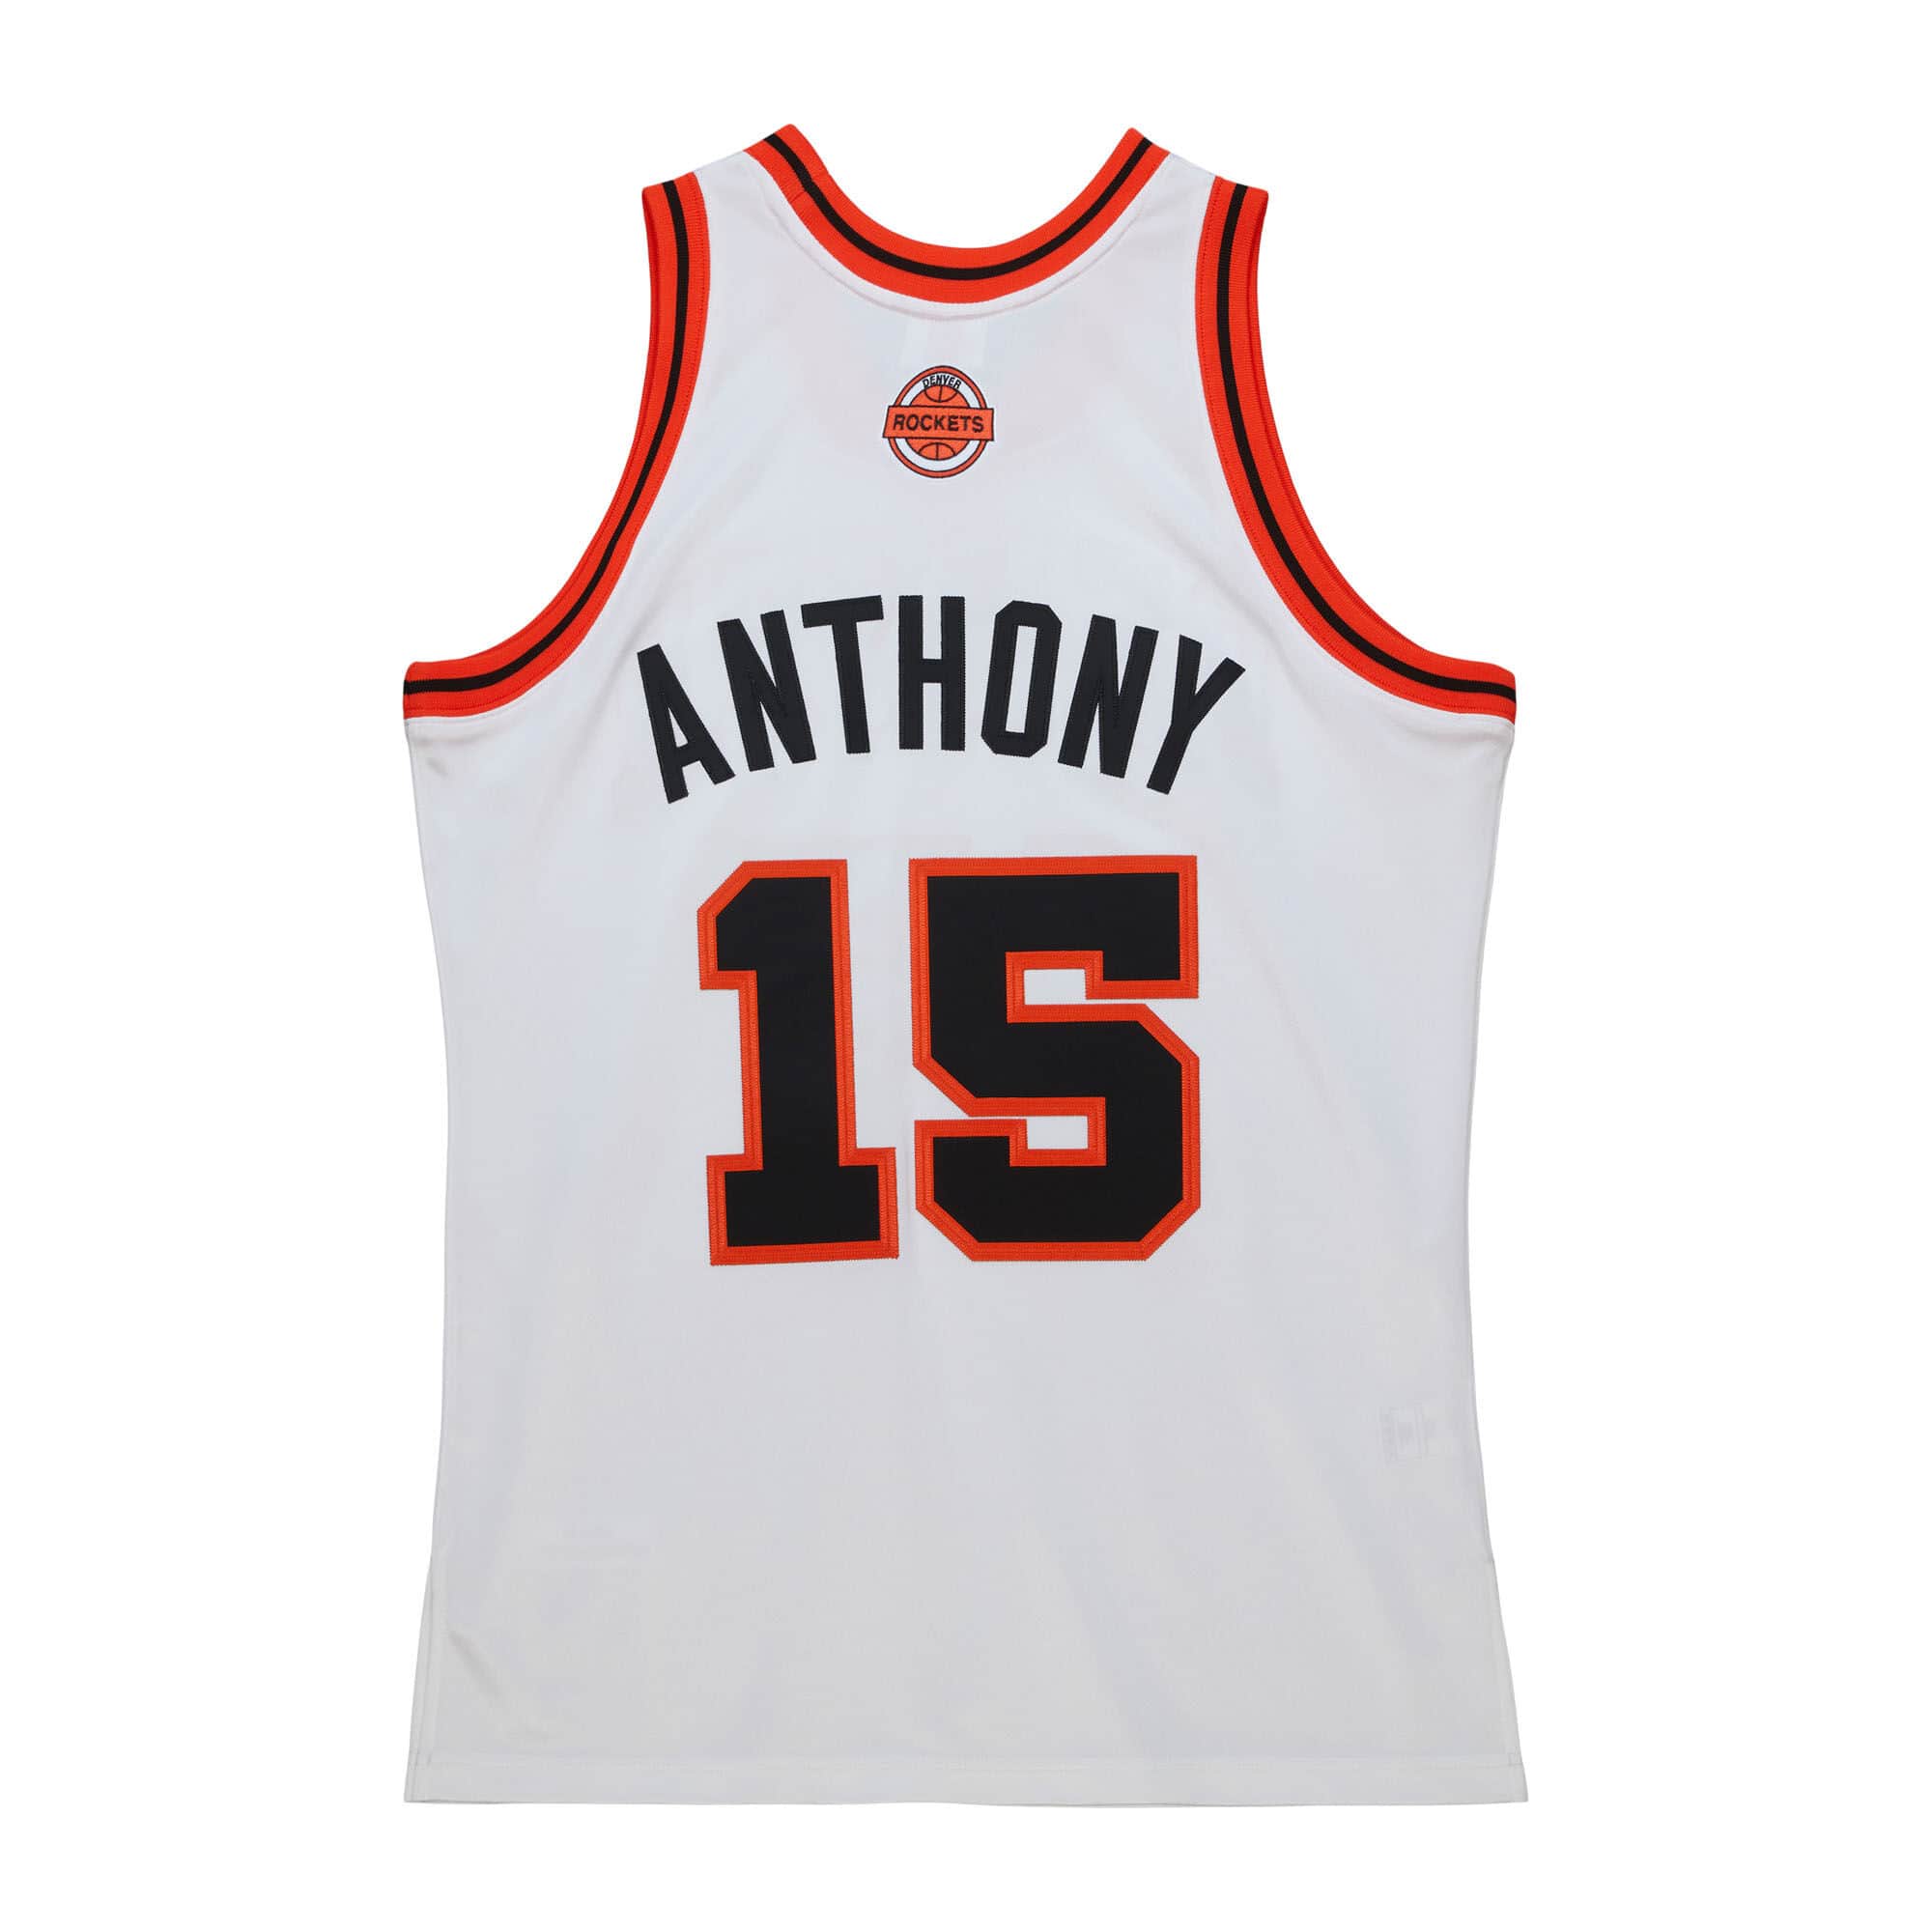 carmelo throwback jersey